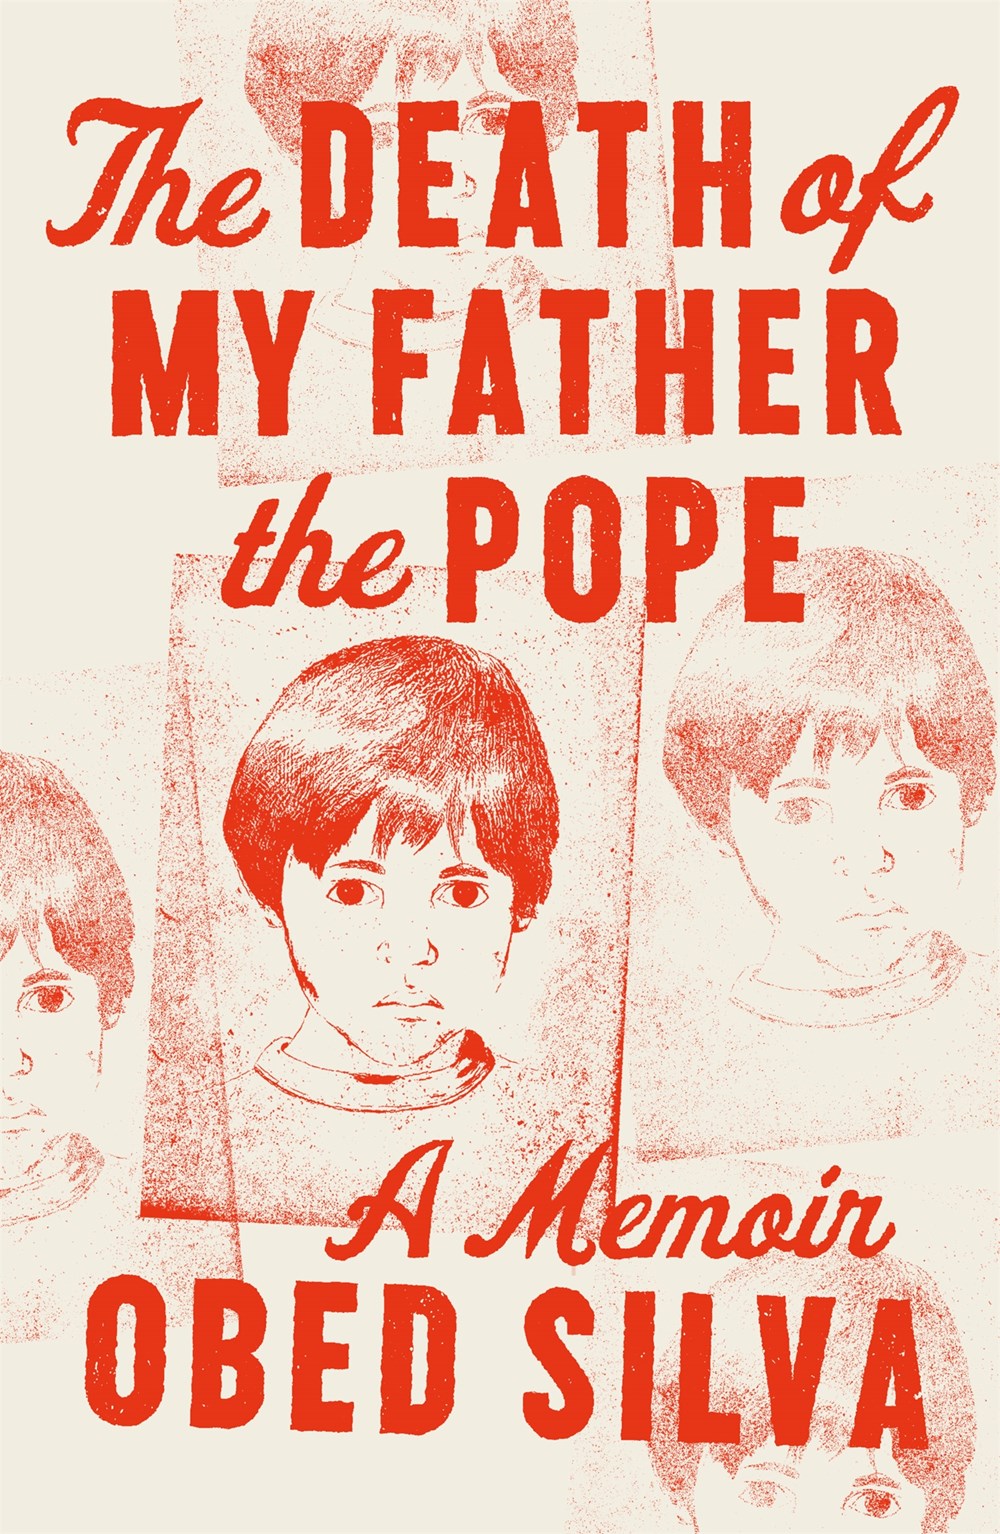 Image for "The Death of My Father the Pope: A Memoir"